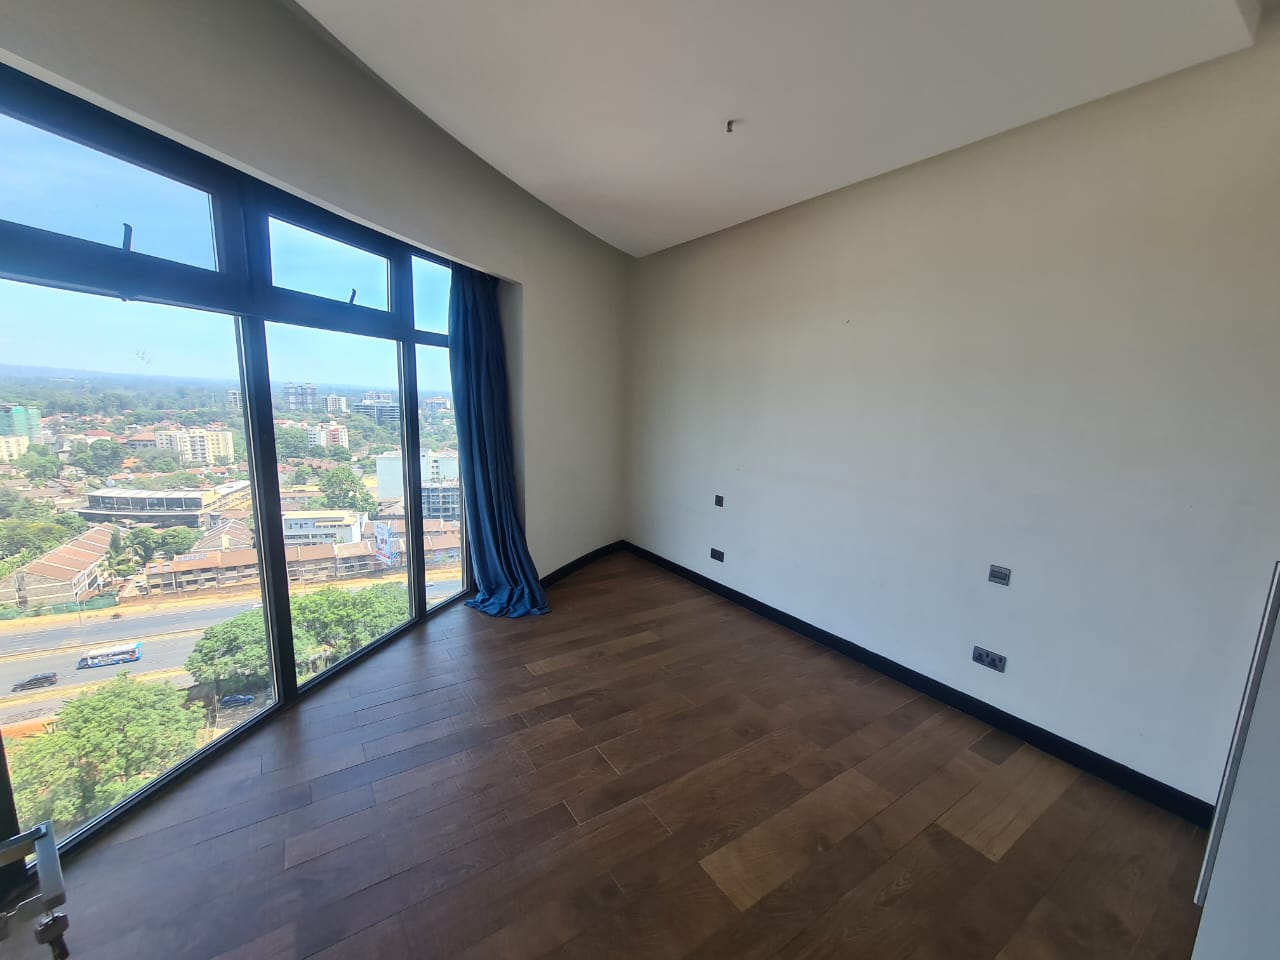 1 and Two Bedroom Unfurnished Apartments for Rent in Westlands with great views for rent at Ksh90kMonth and 120kmonth respectively (17)